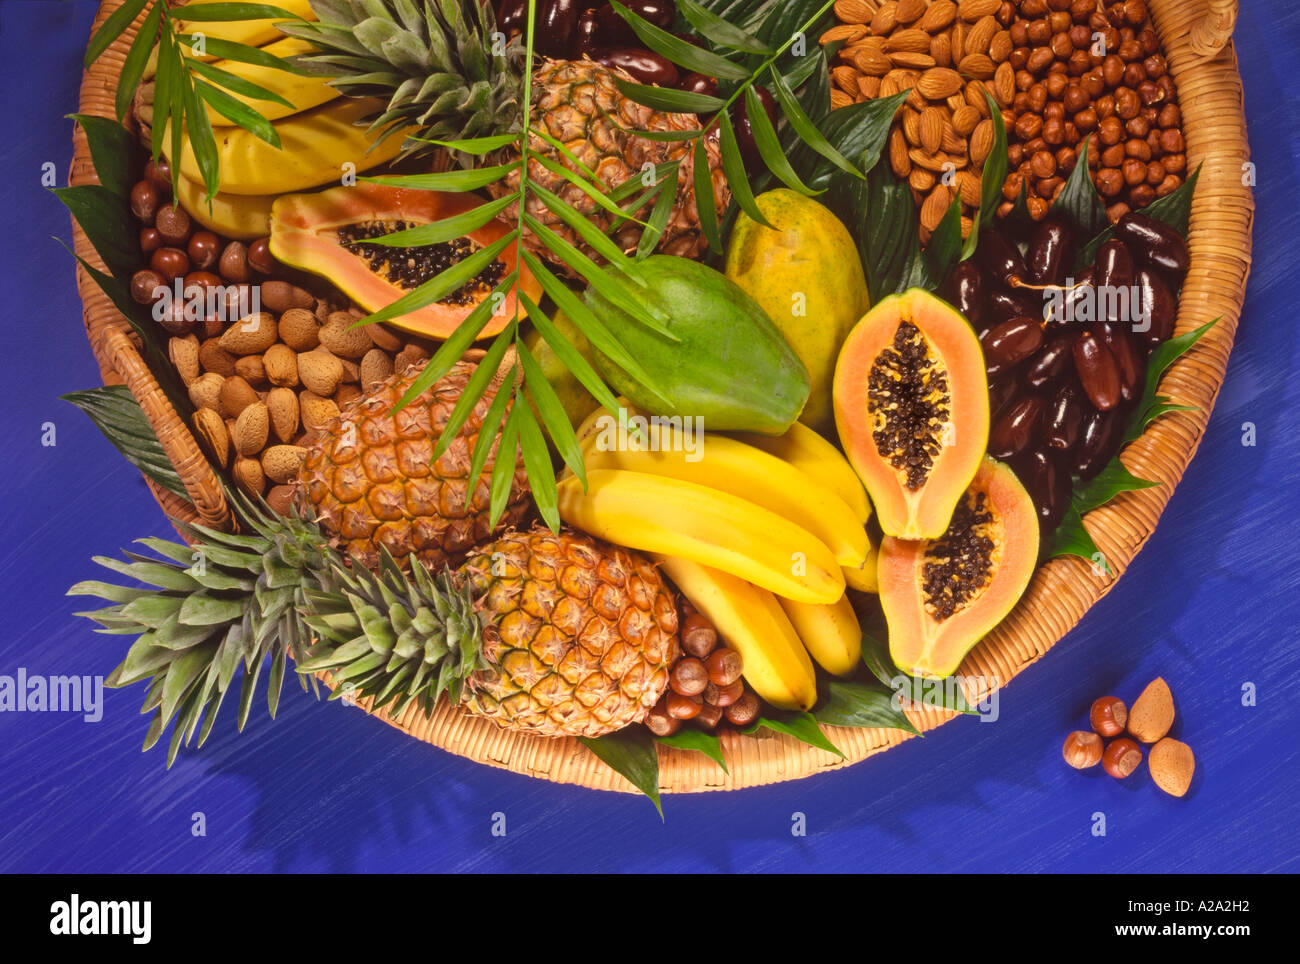 BASKET OF TROPICAL FRUITS Stock Photo